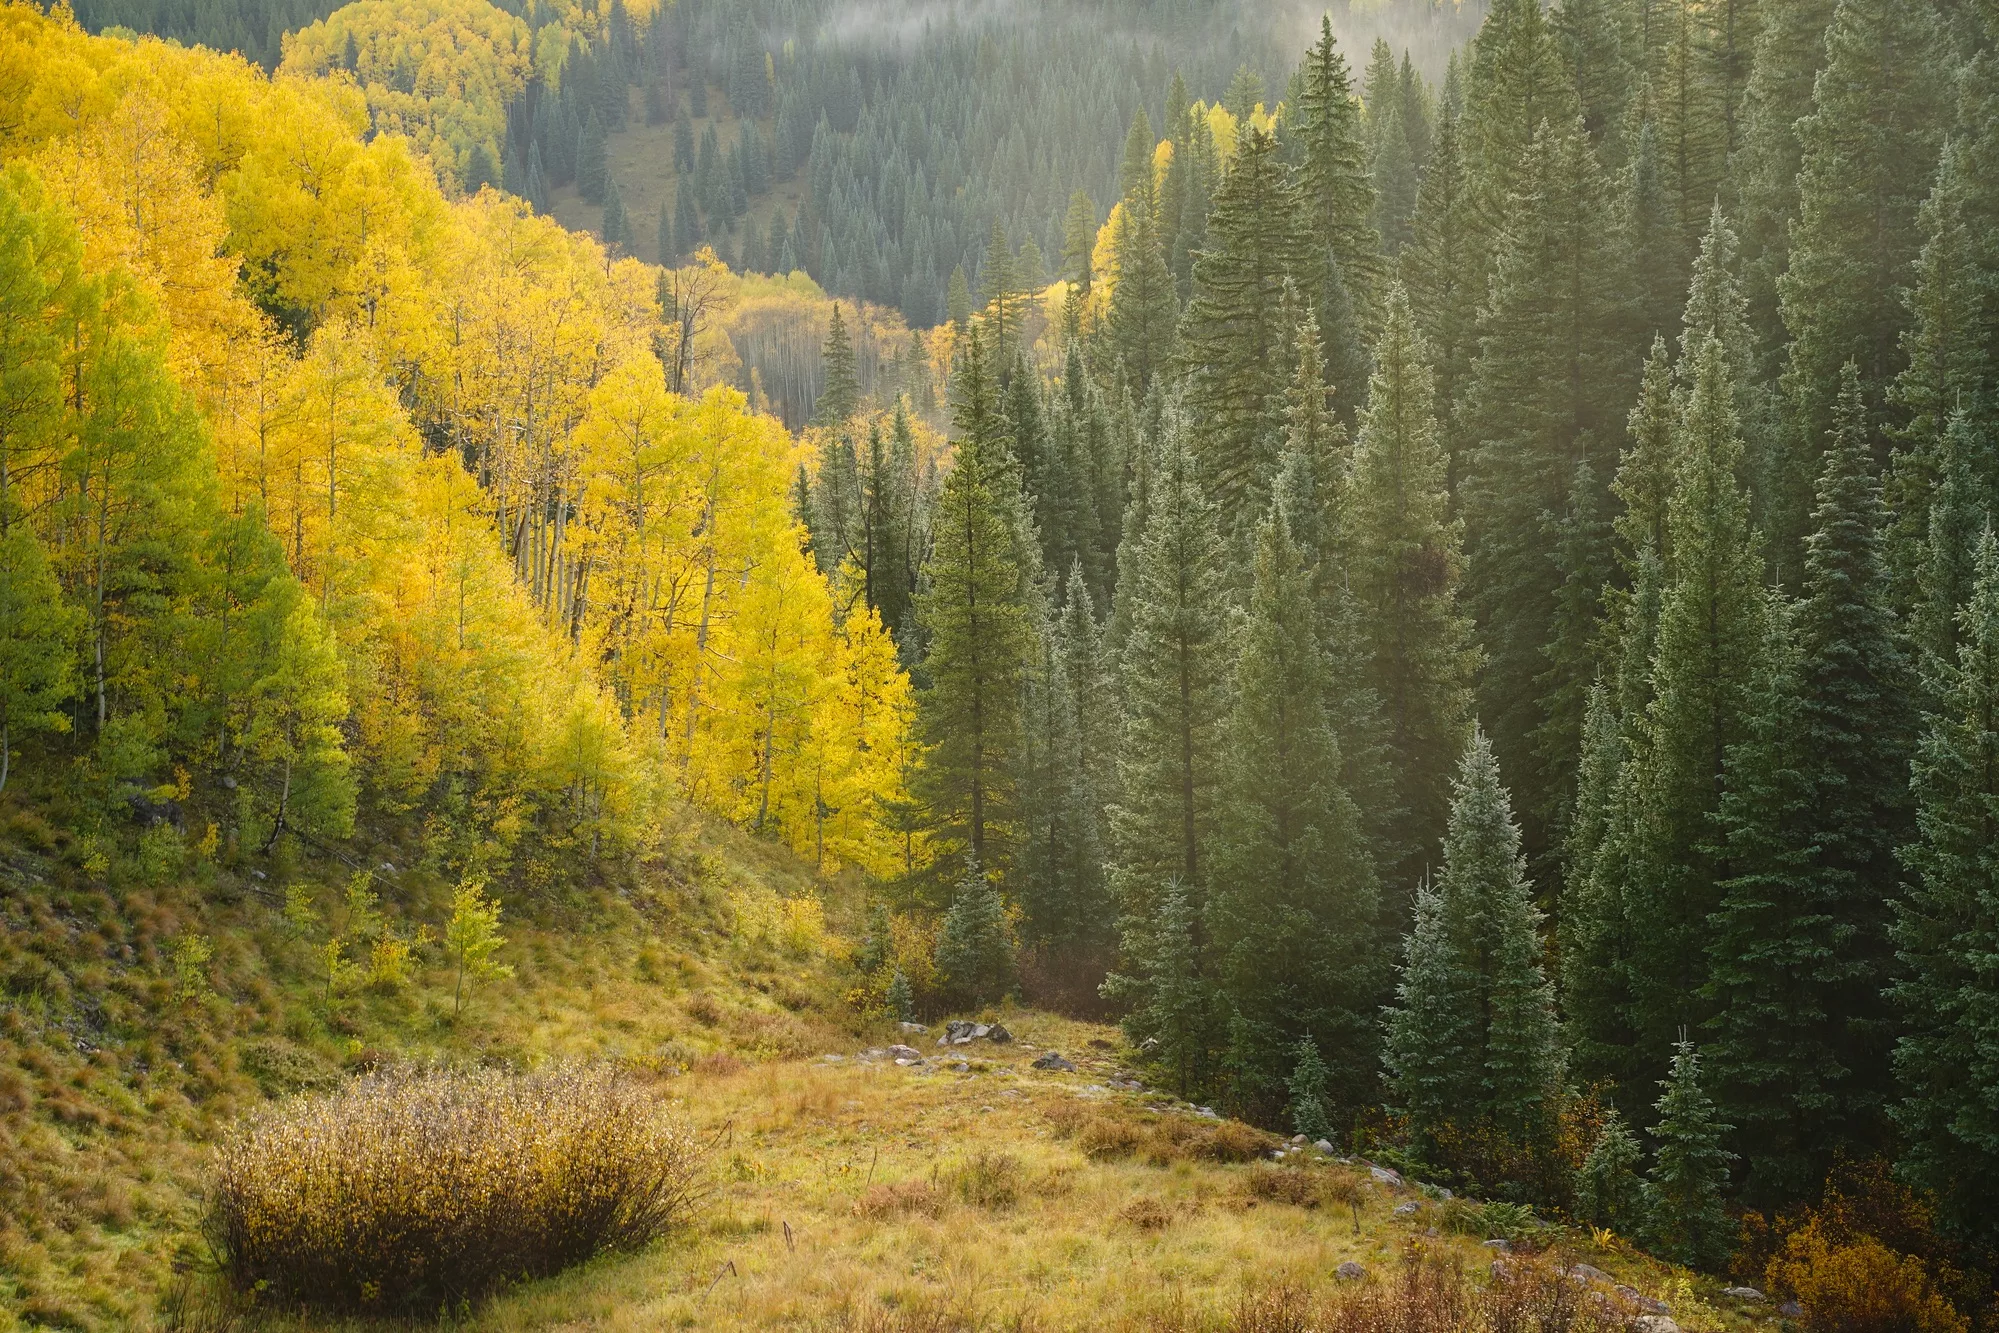 Don Mammoser Guided Photography Tours vibrant tall yellow Aspen and Pine trees